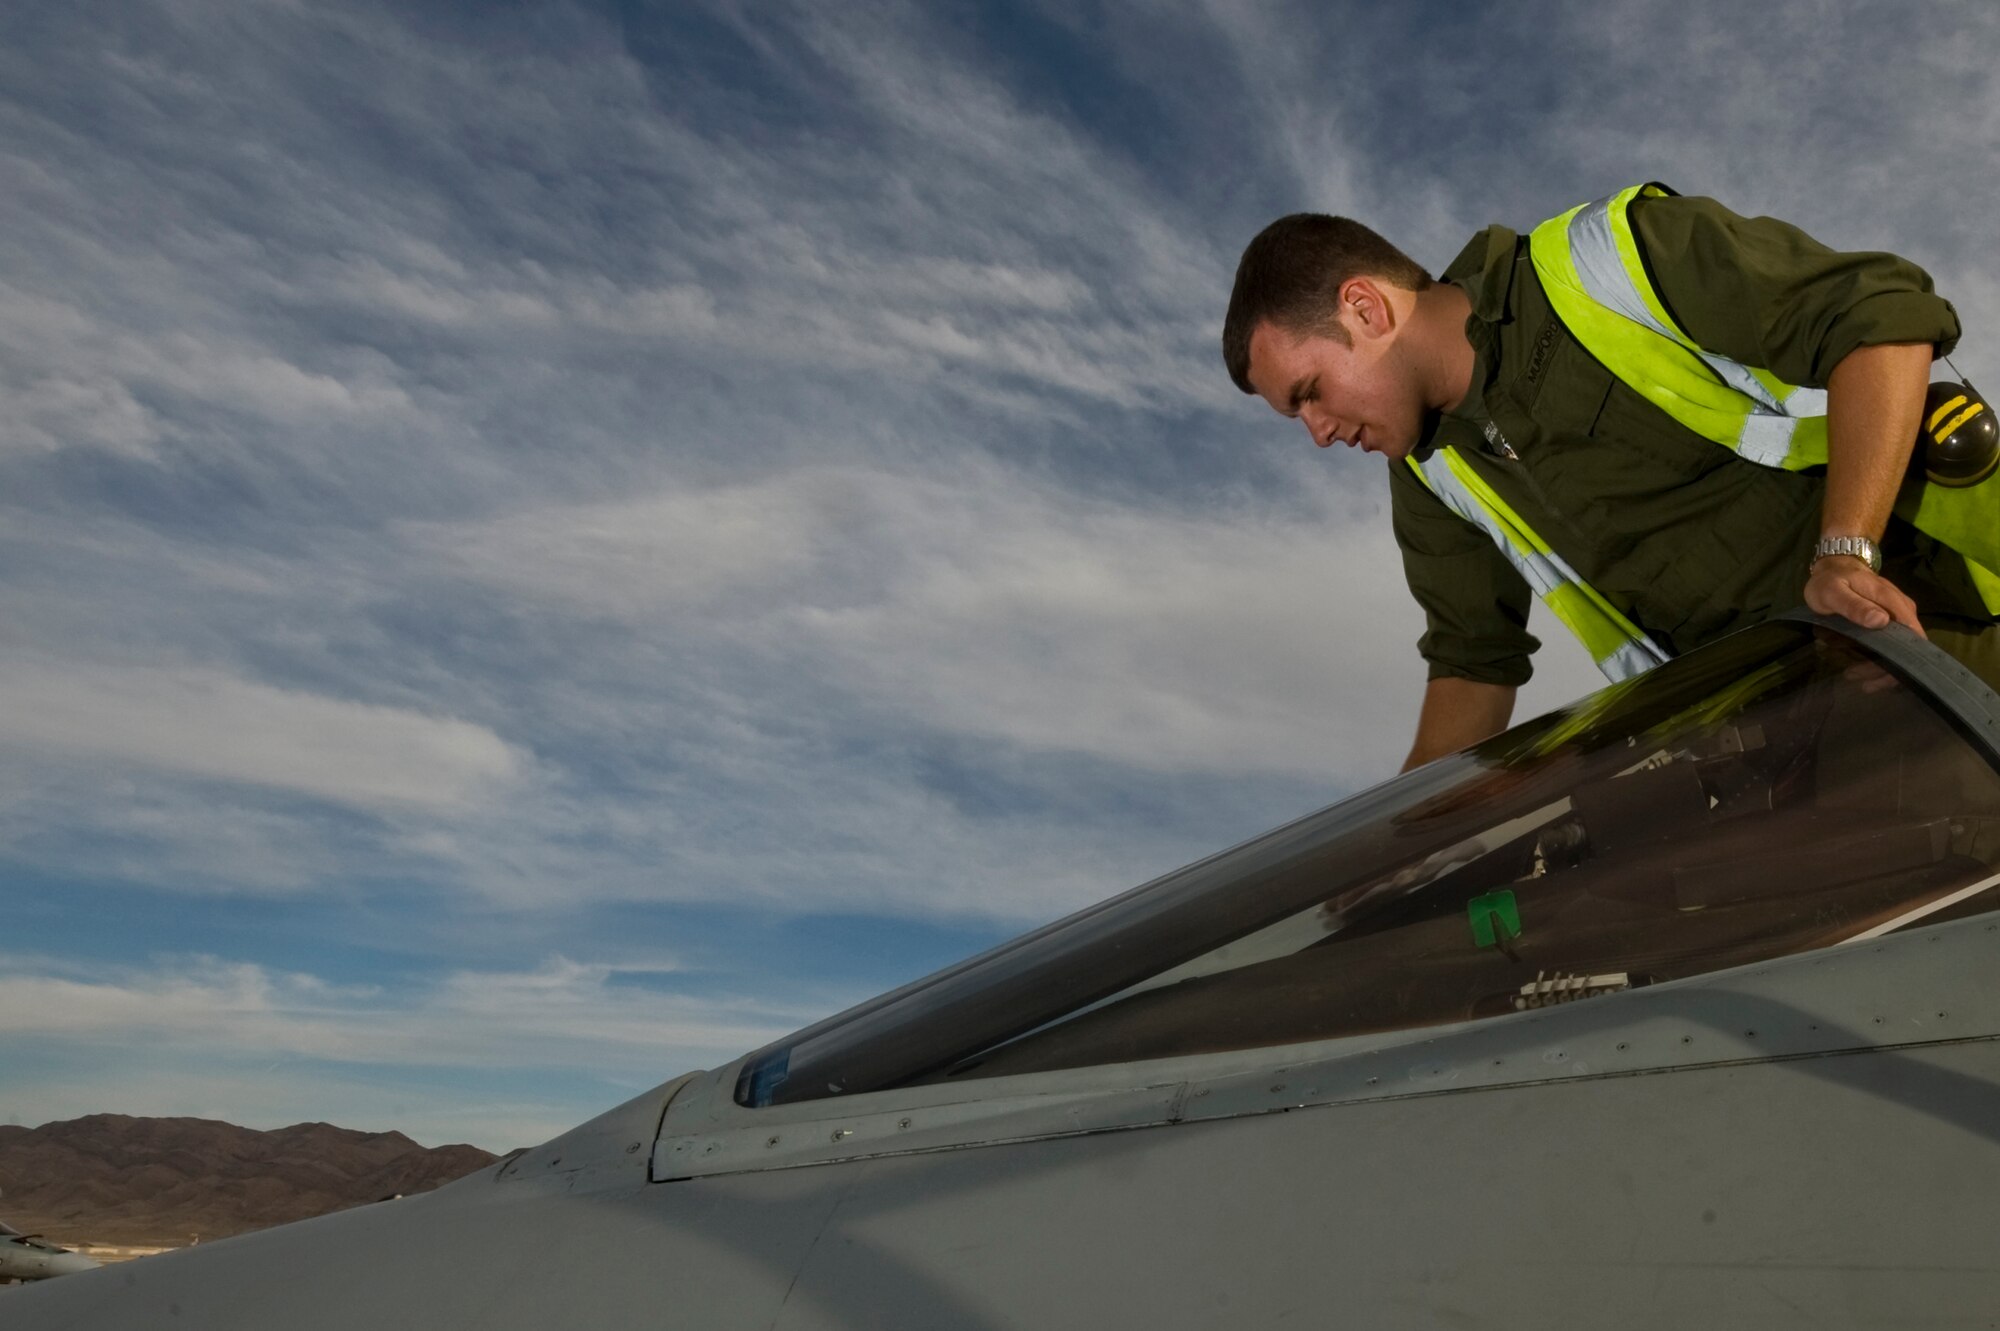 Royal Air Force of the United Kingdom, Senior Aircraftsman Daniel Mumford, 2nd Army Cooperation Squadron, engineer, RAF Marham, finishes closing a panel on a GR4 Tornado, during Red Flag 12-3 March 5, 2012, at Nellis Air Force Base, Nev. Red Flag is a realistic combat training exercise involving the air forces of the United States and its allies.(U.S. Air Force photo by Airman 1st Class Daniel Hughes)